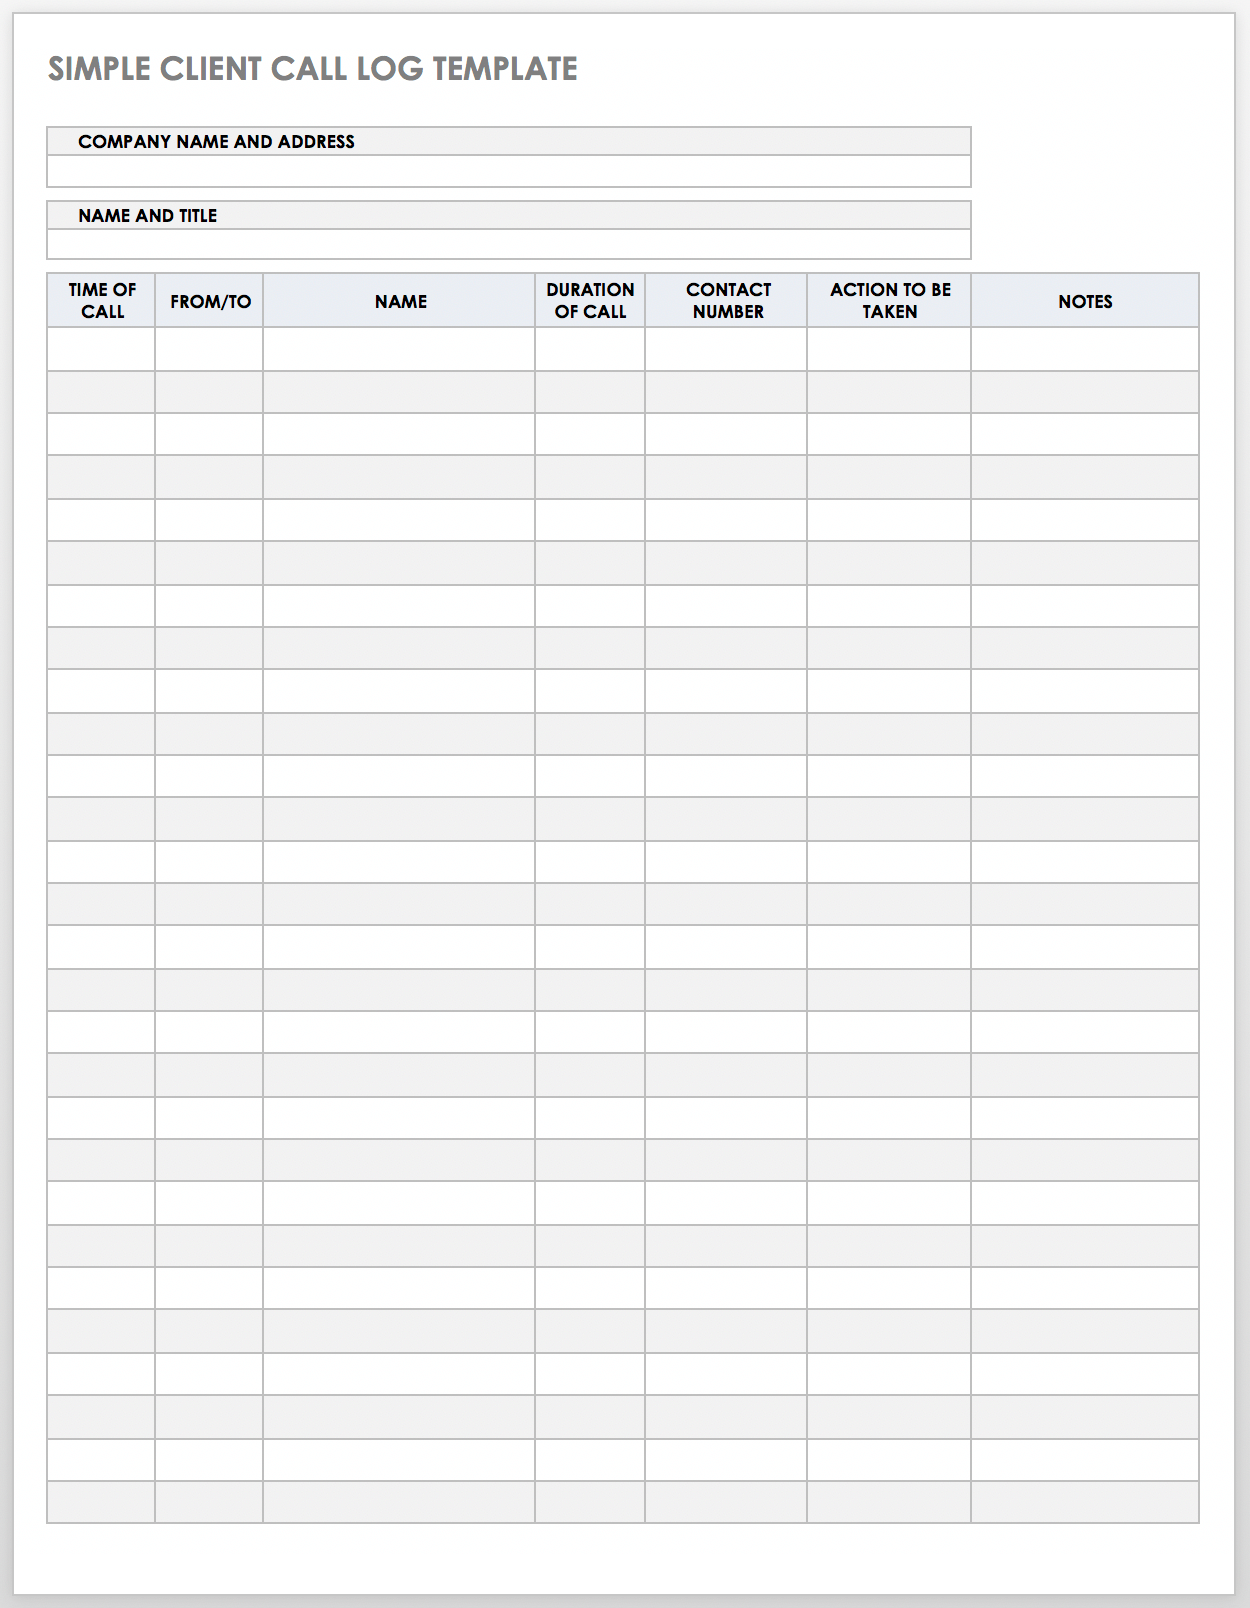 Free Client Call Log Templates  Smartsheet Intended For Sales Call Report Template Free